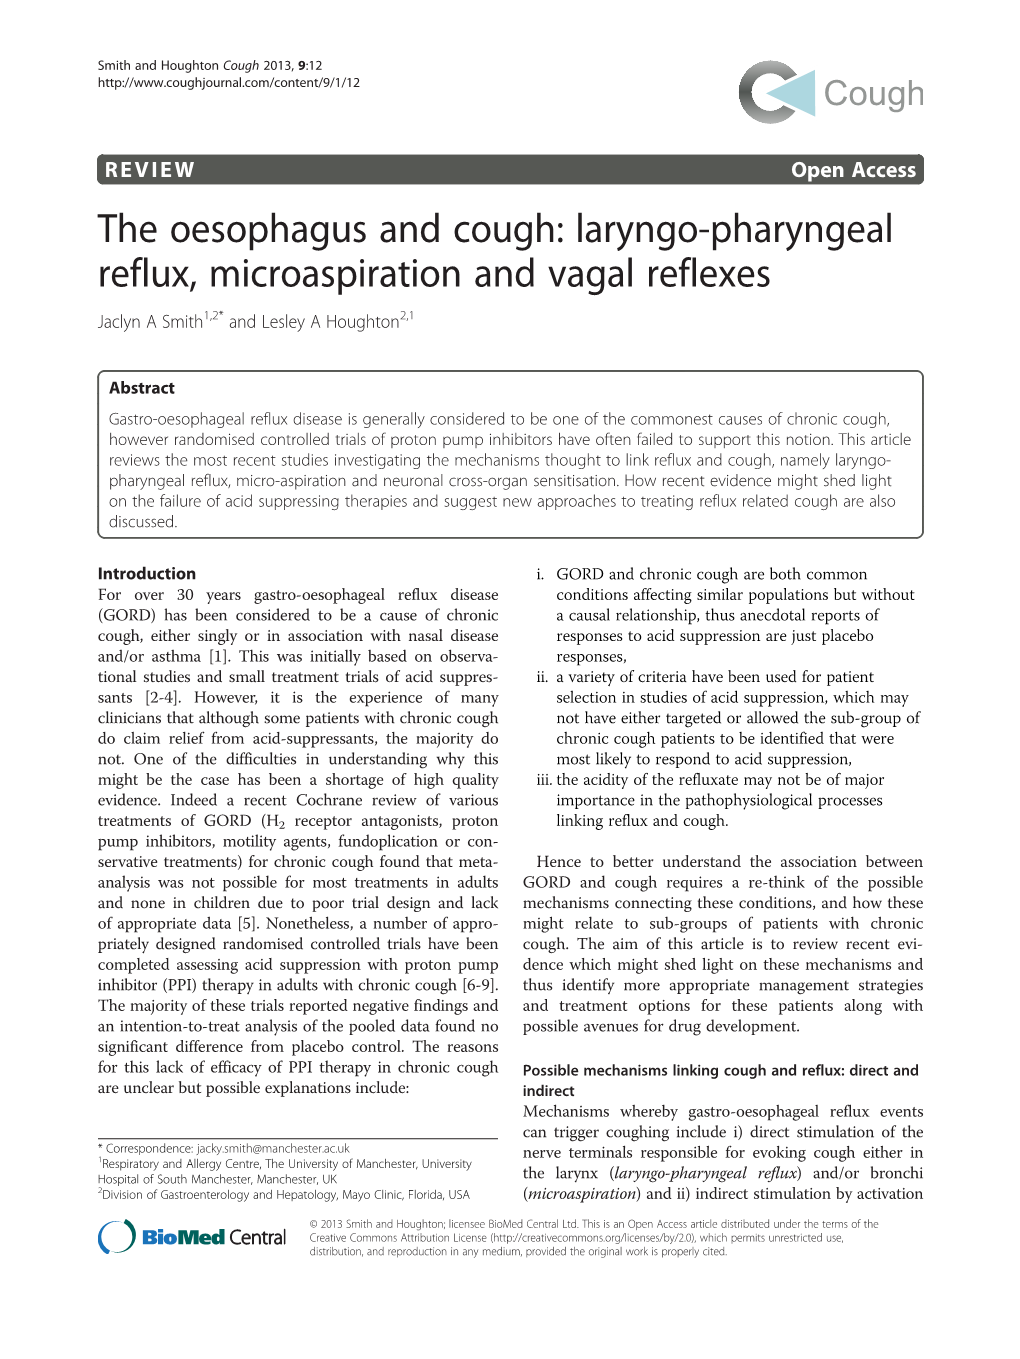 Laryngo-Pharyngeal Reflux, Microaspiration and Vagal Reflexes Jaclyn a Smith1,2* and Lesley a Houghton2,1